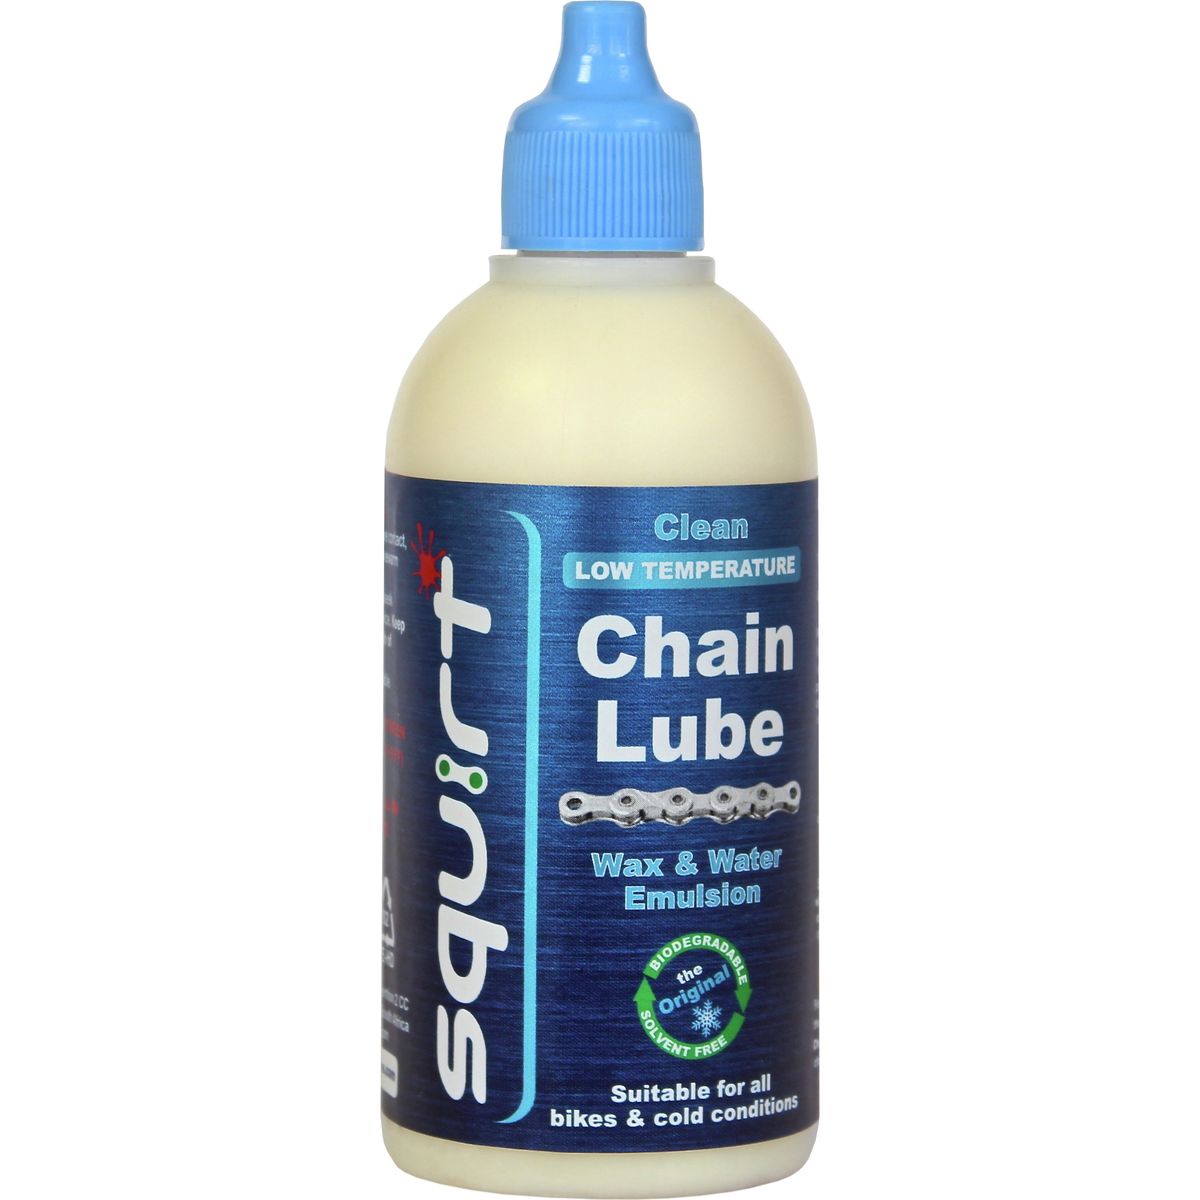 Squirt Lube Low Temp Chain Lube